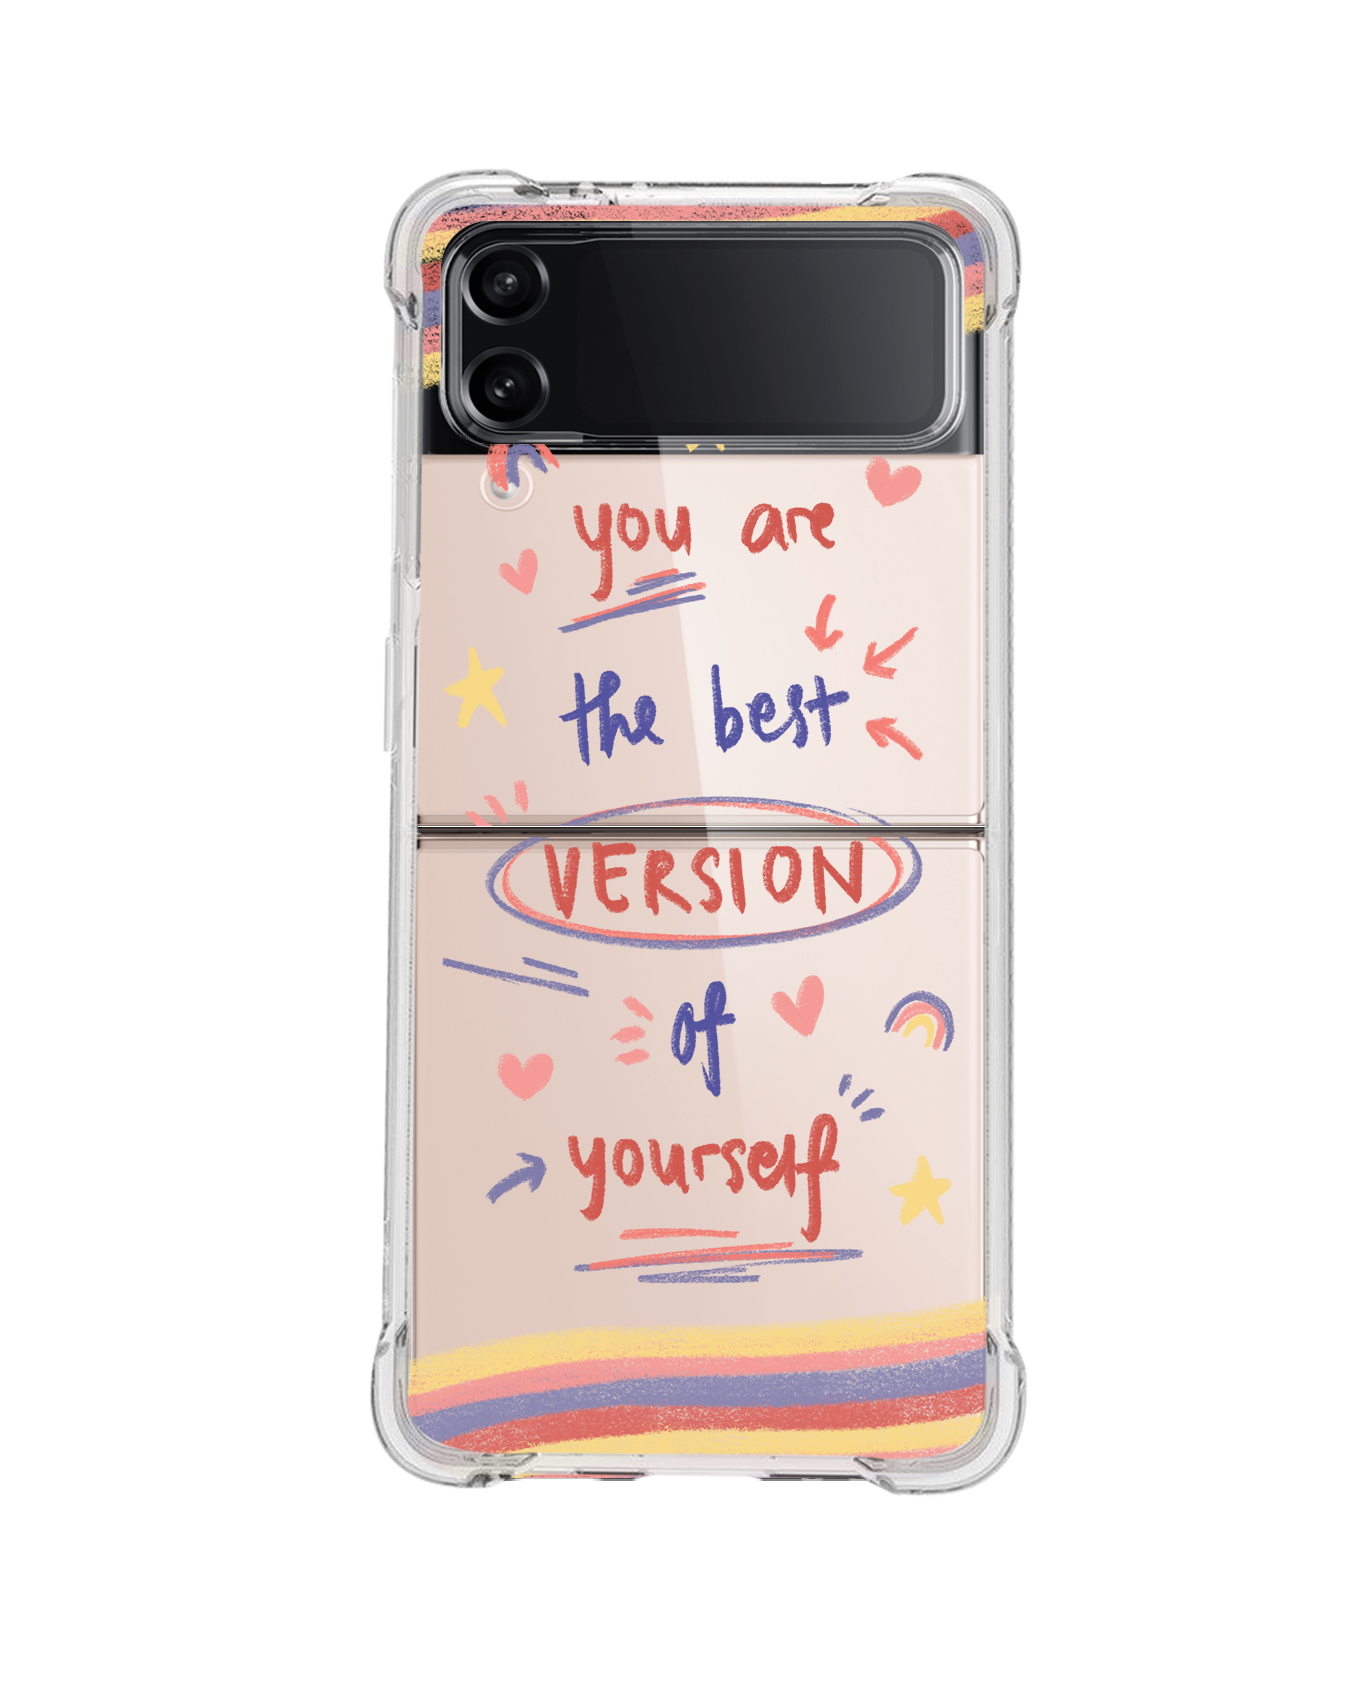 Android Flip / Fold Case - Love Yourself